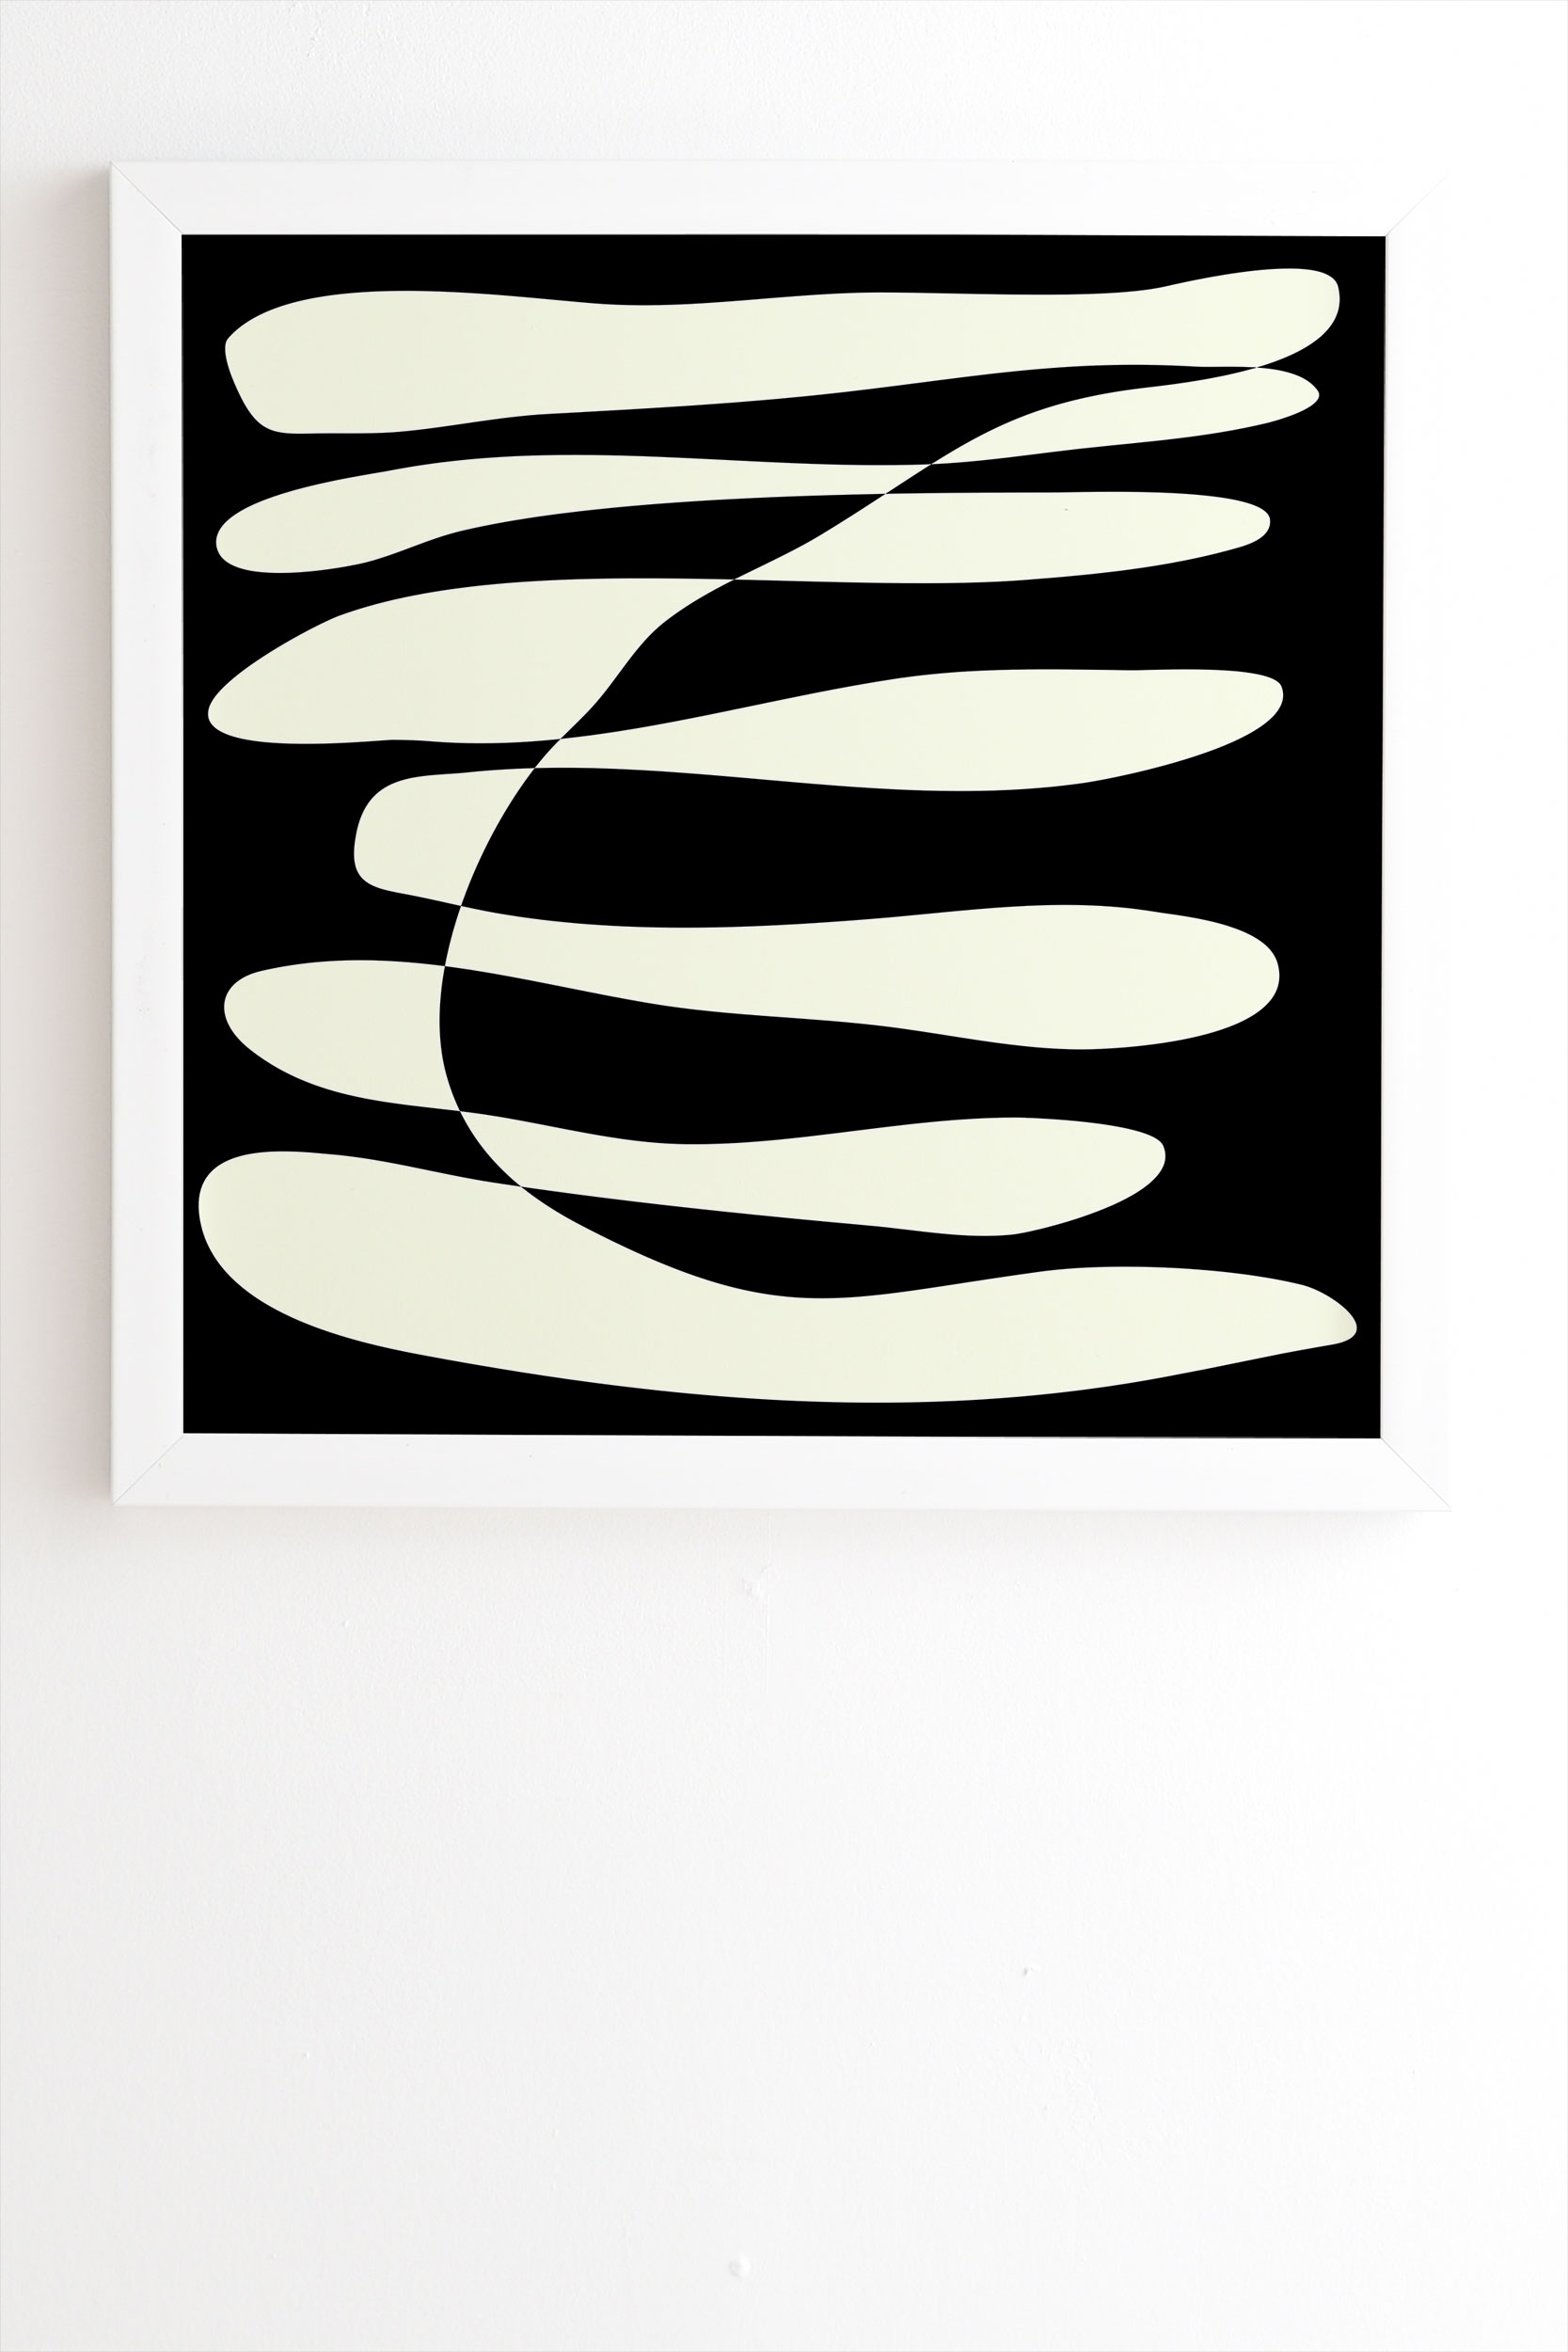 Abstract Composition In Black by June Journal - Framed Wall Art Basic White 19" x 22.4" - Image 1